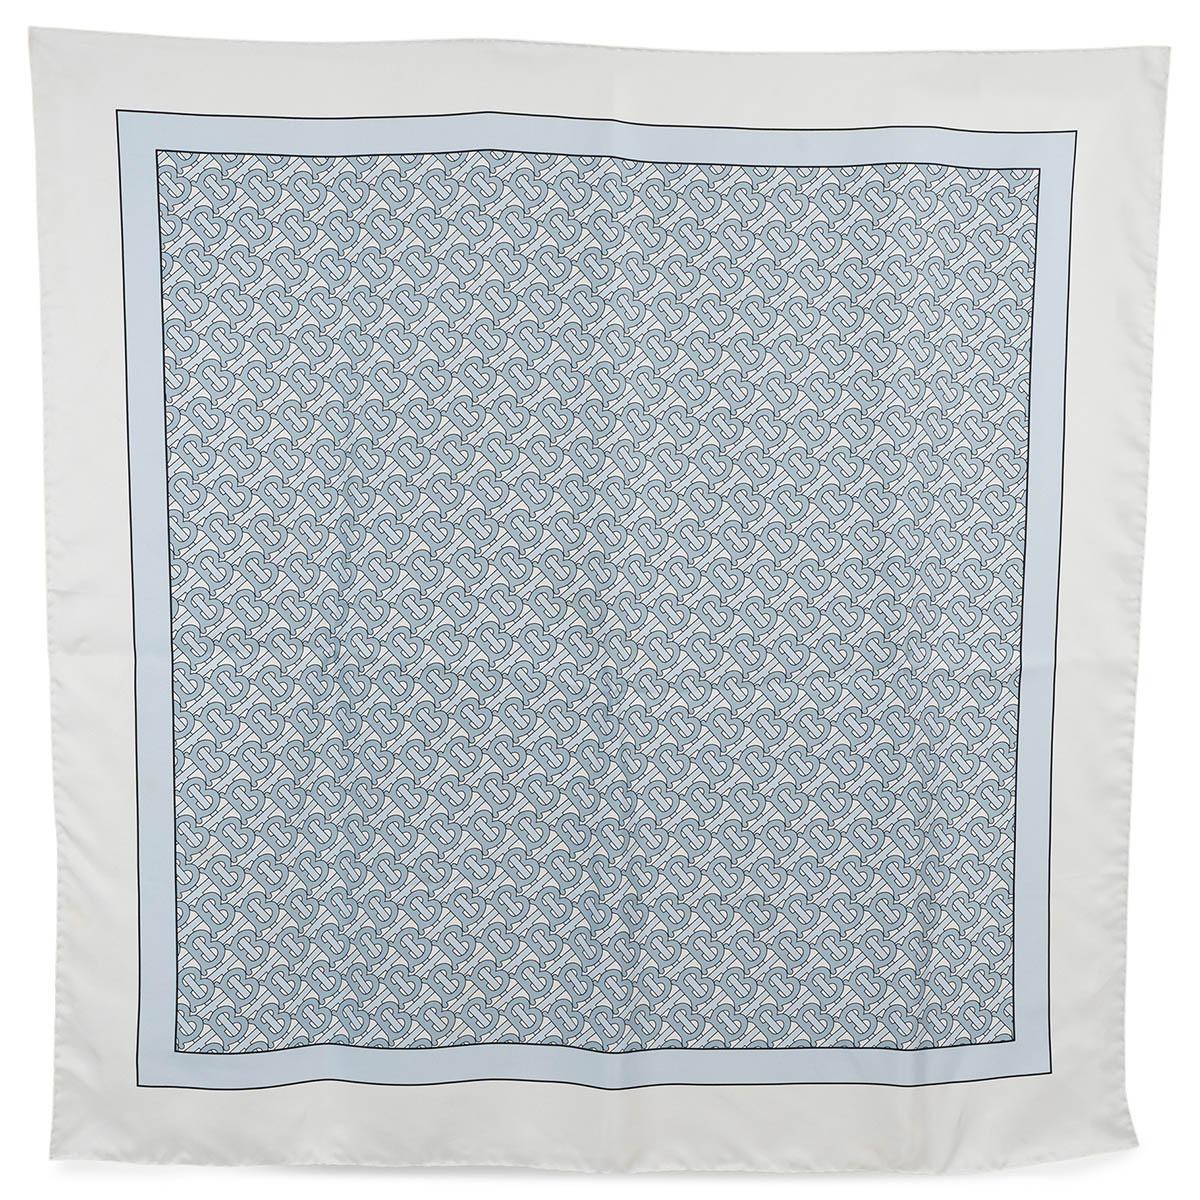 100% authentic Burberry TB monogram 90 silk scarf in pale blue, light blue and white silk. Has been worn and shows a faint stain on the white border. Overall in very good condition. 

Measurements
Width	90cm (35.1in)
Length	90cm (35.1in)

All our